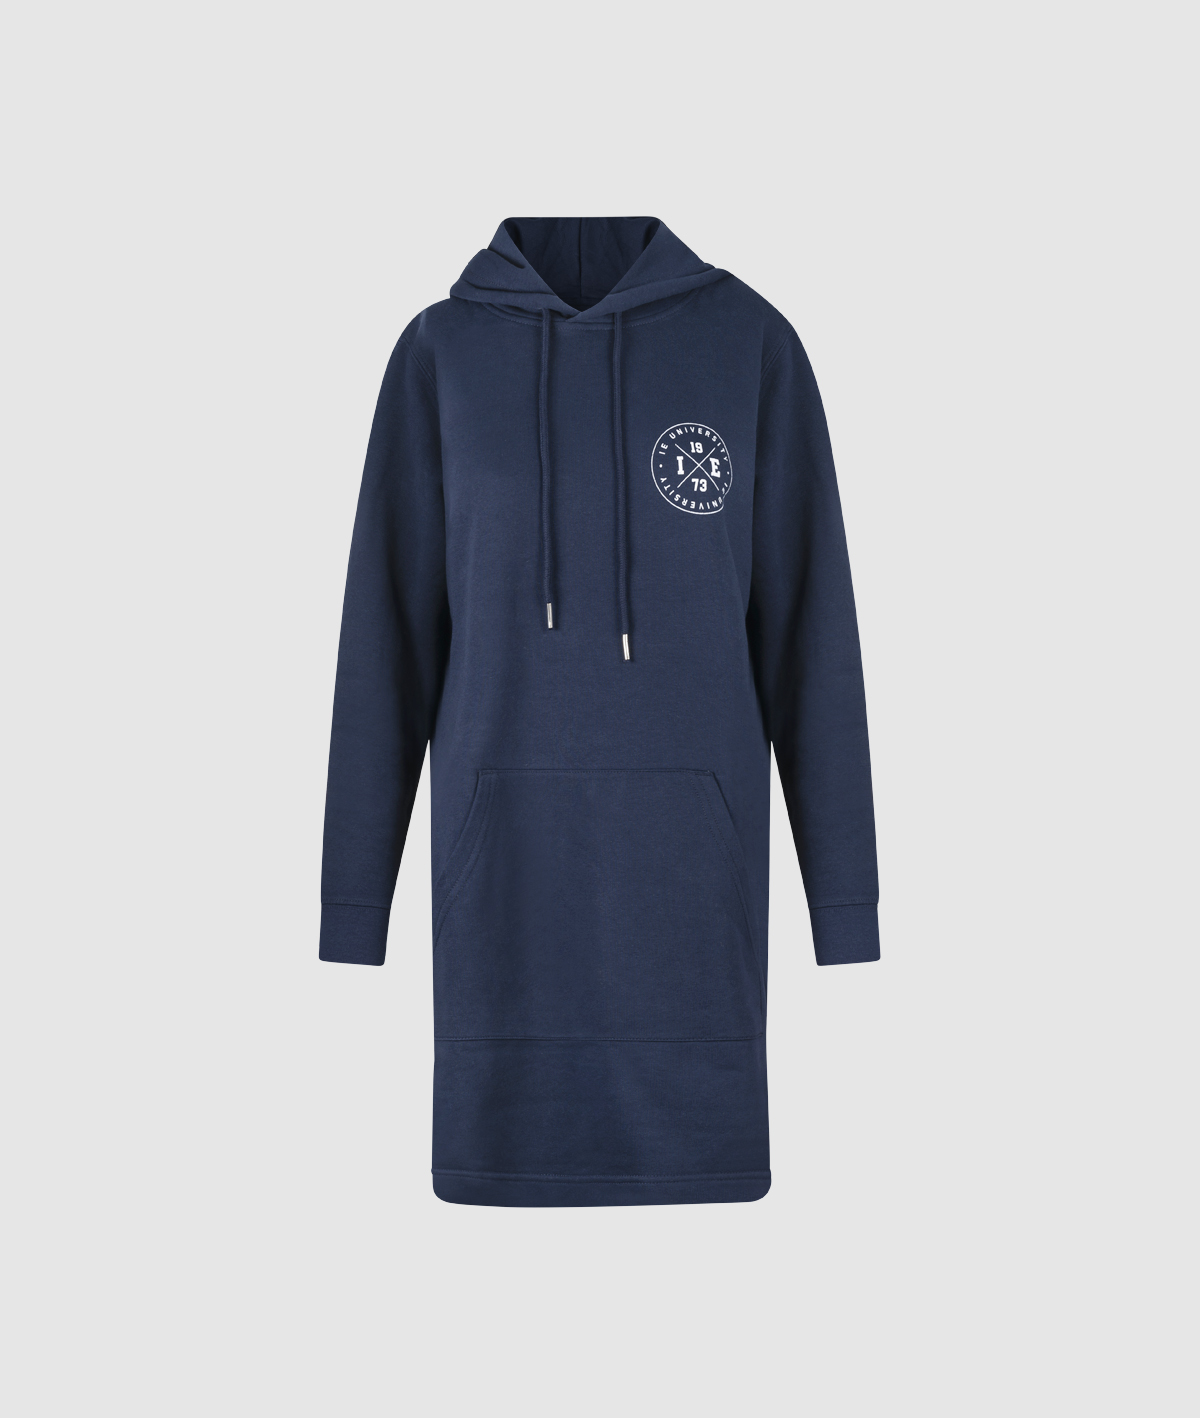 Dress Streeter IEU Hoodie. french navy colour front